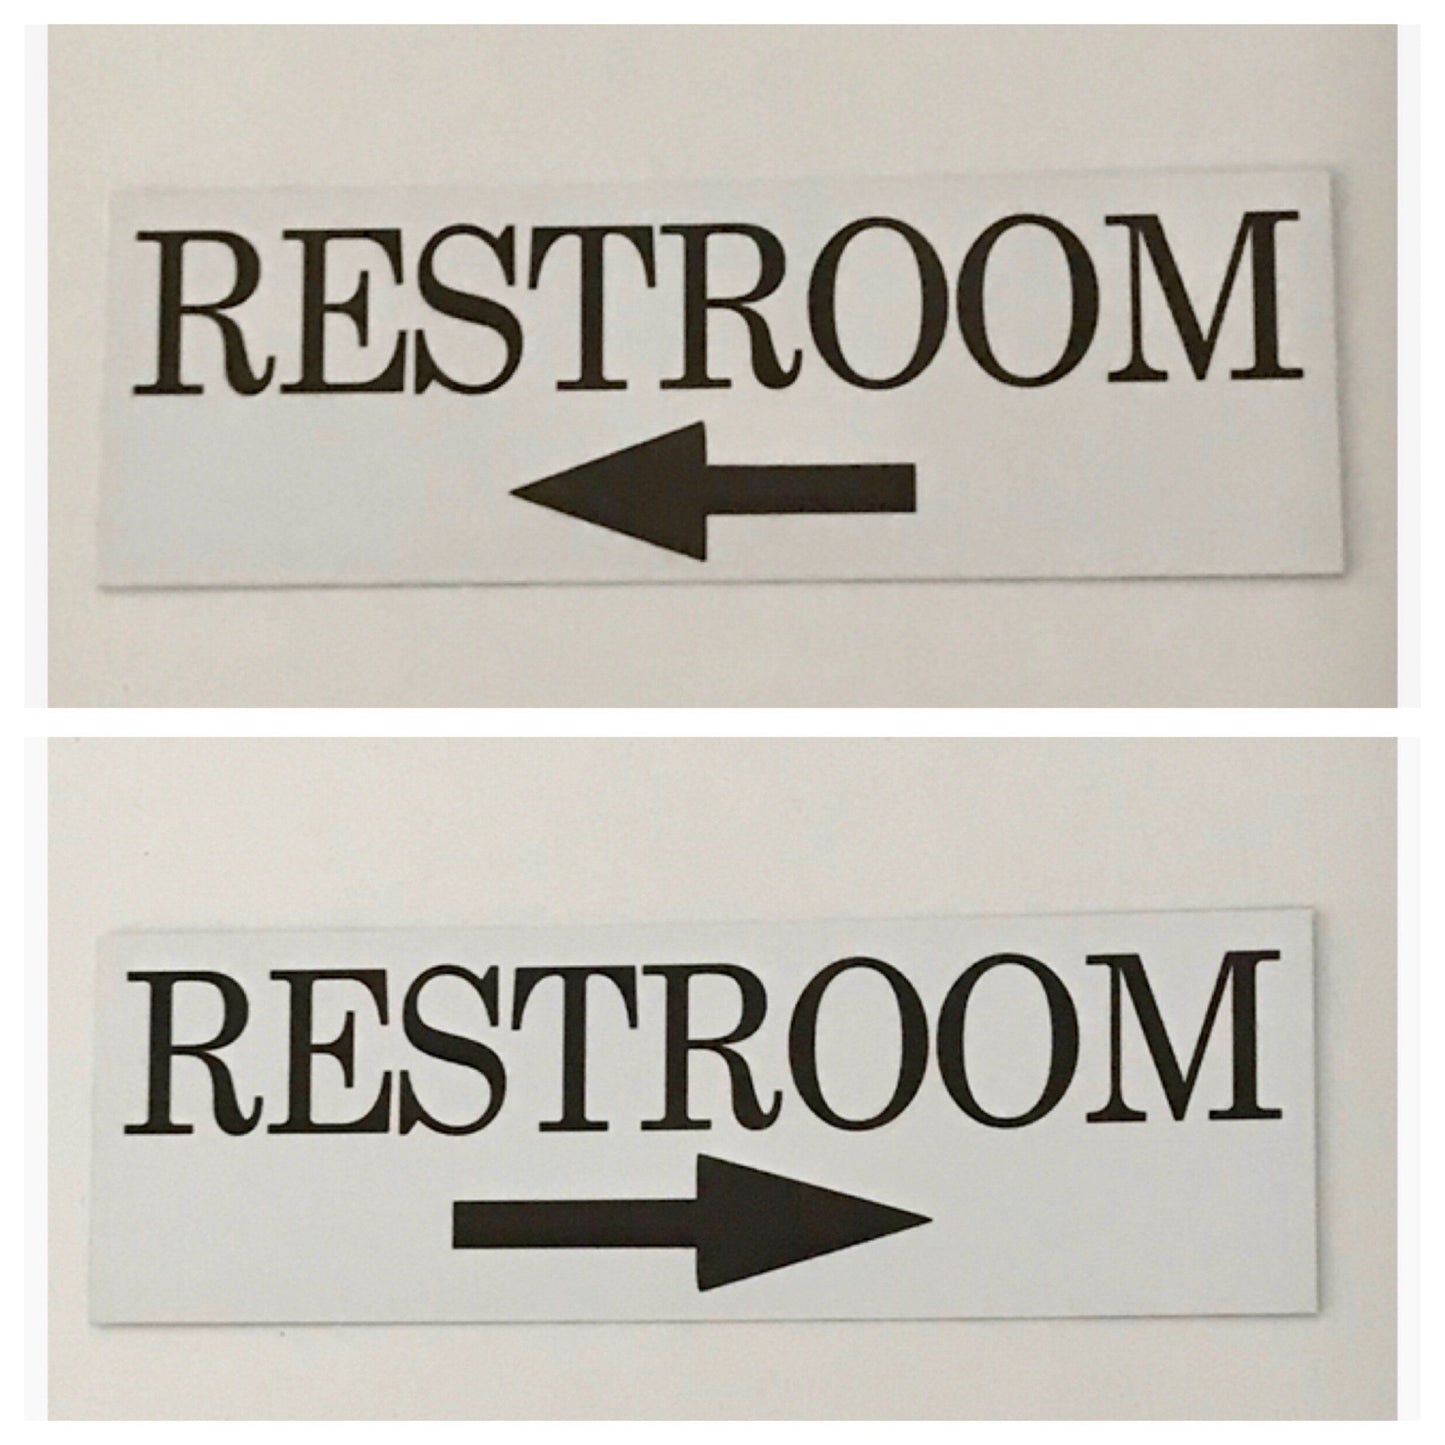 Restroom Toilet with Arrow Sign